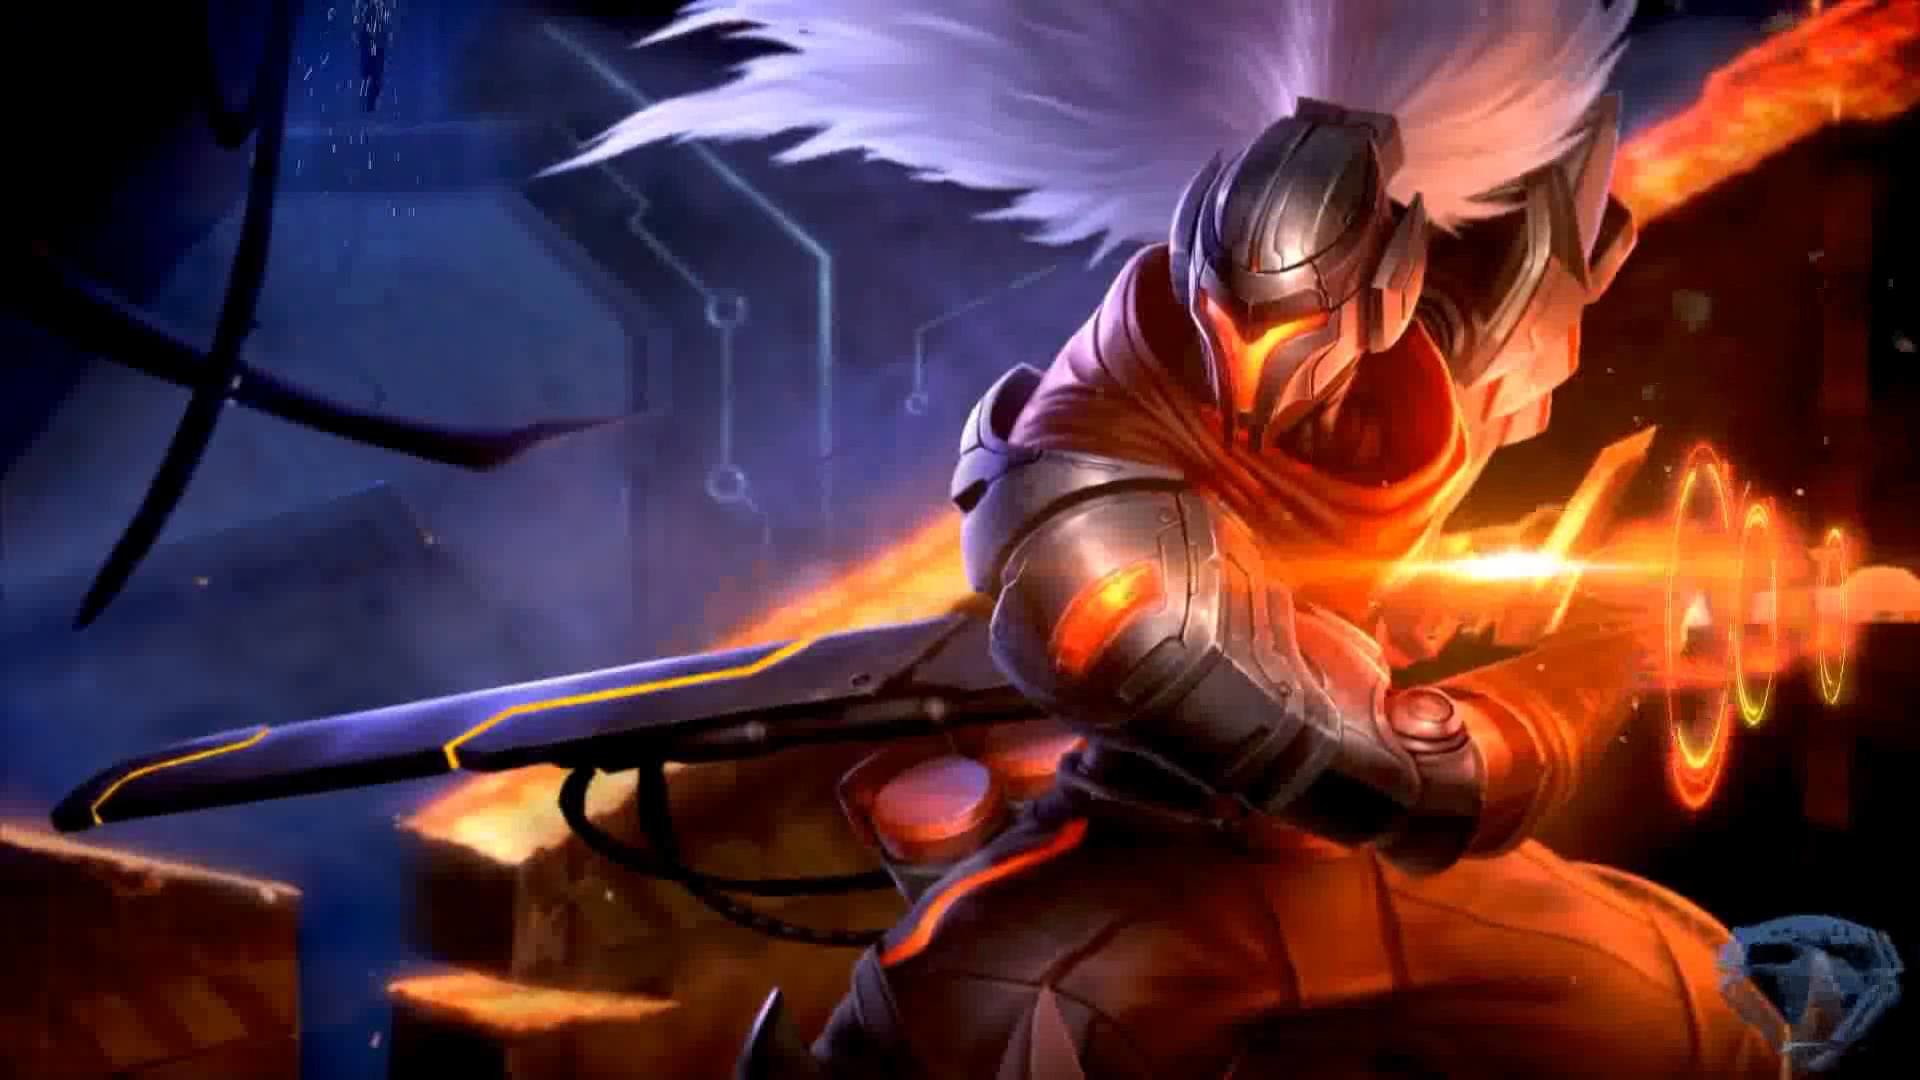 1920x1080 Project Yasuo (animated by DeepSpeeD187) Live Wallpaper